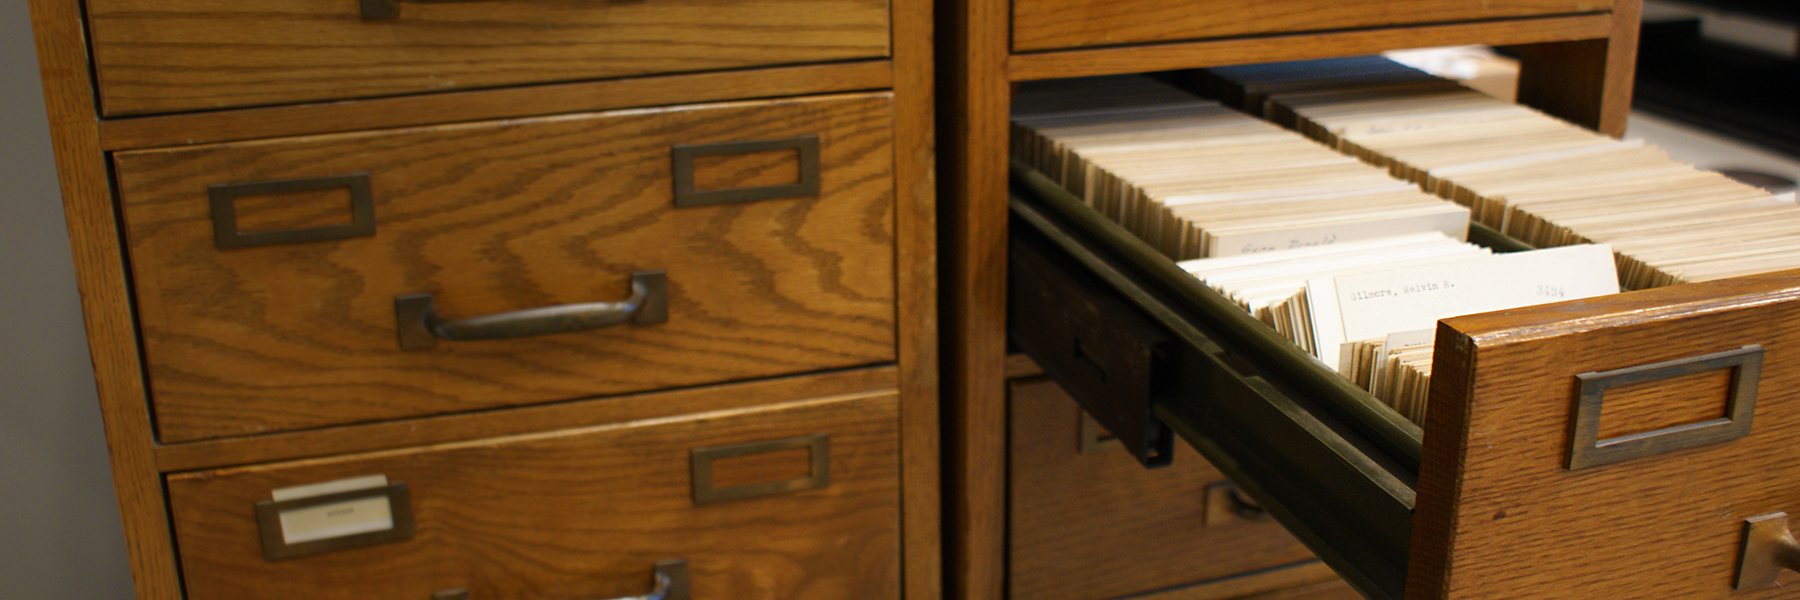 This is a close up view of a card catalog with one drawer to the right open showing the cards.